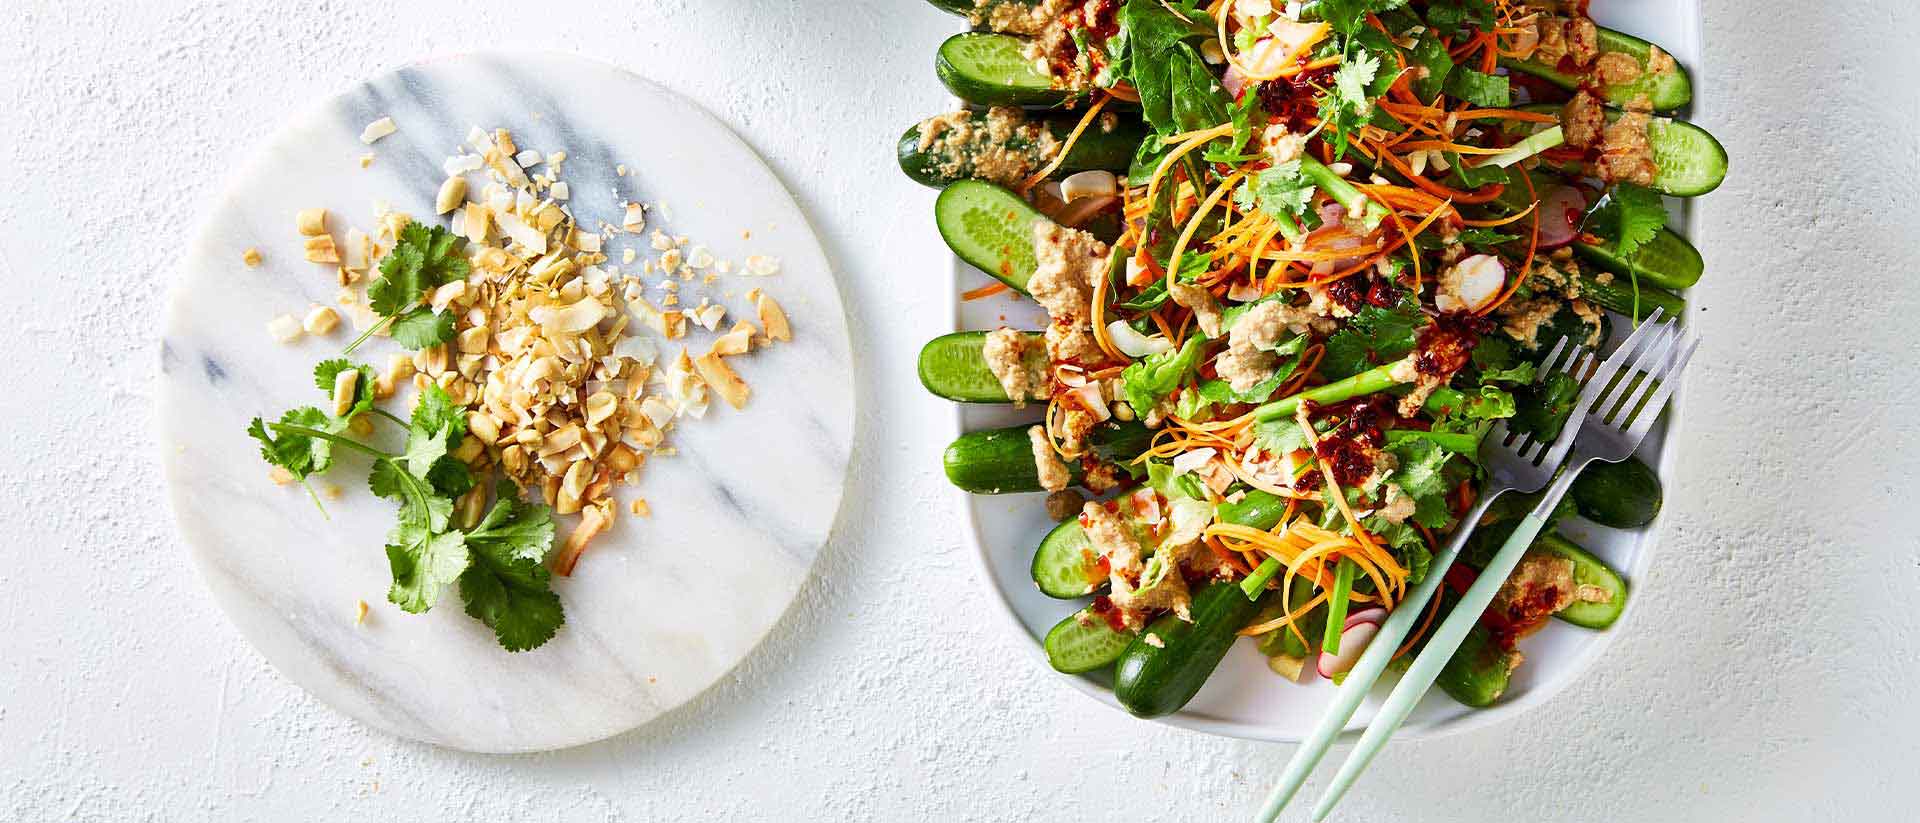 Qukes® Crunch Salad with Peanut Lime Dressing Recipe 